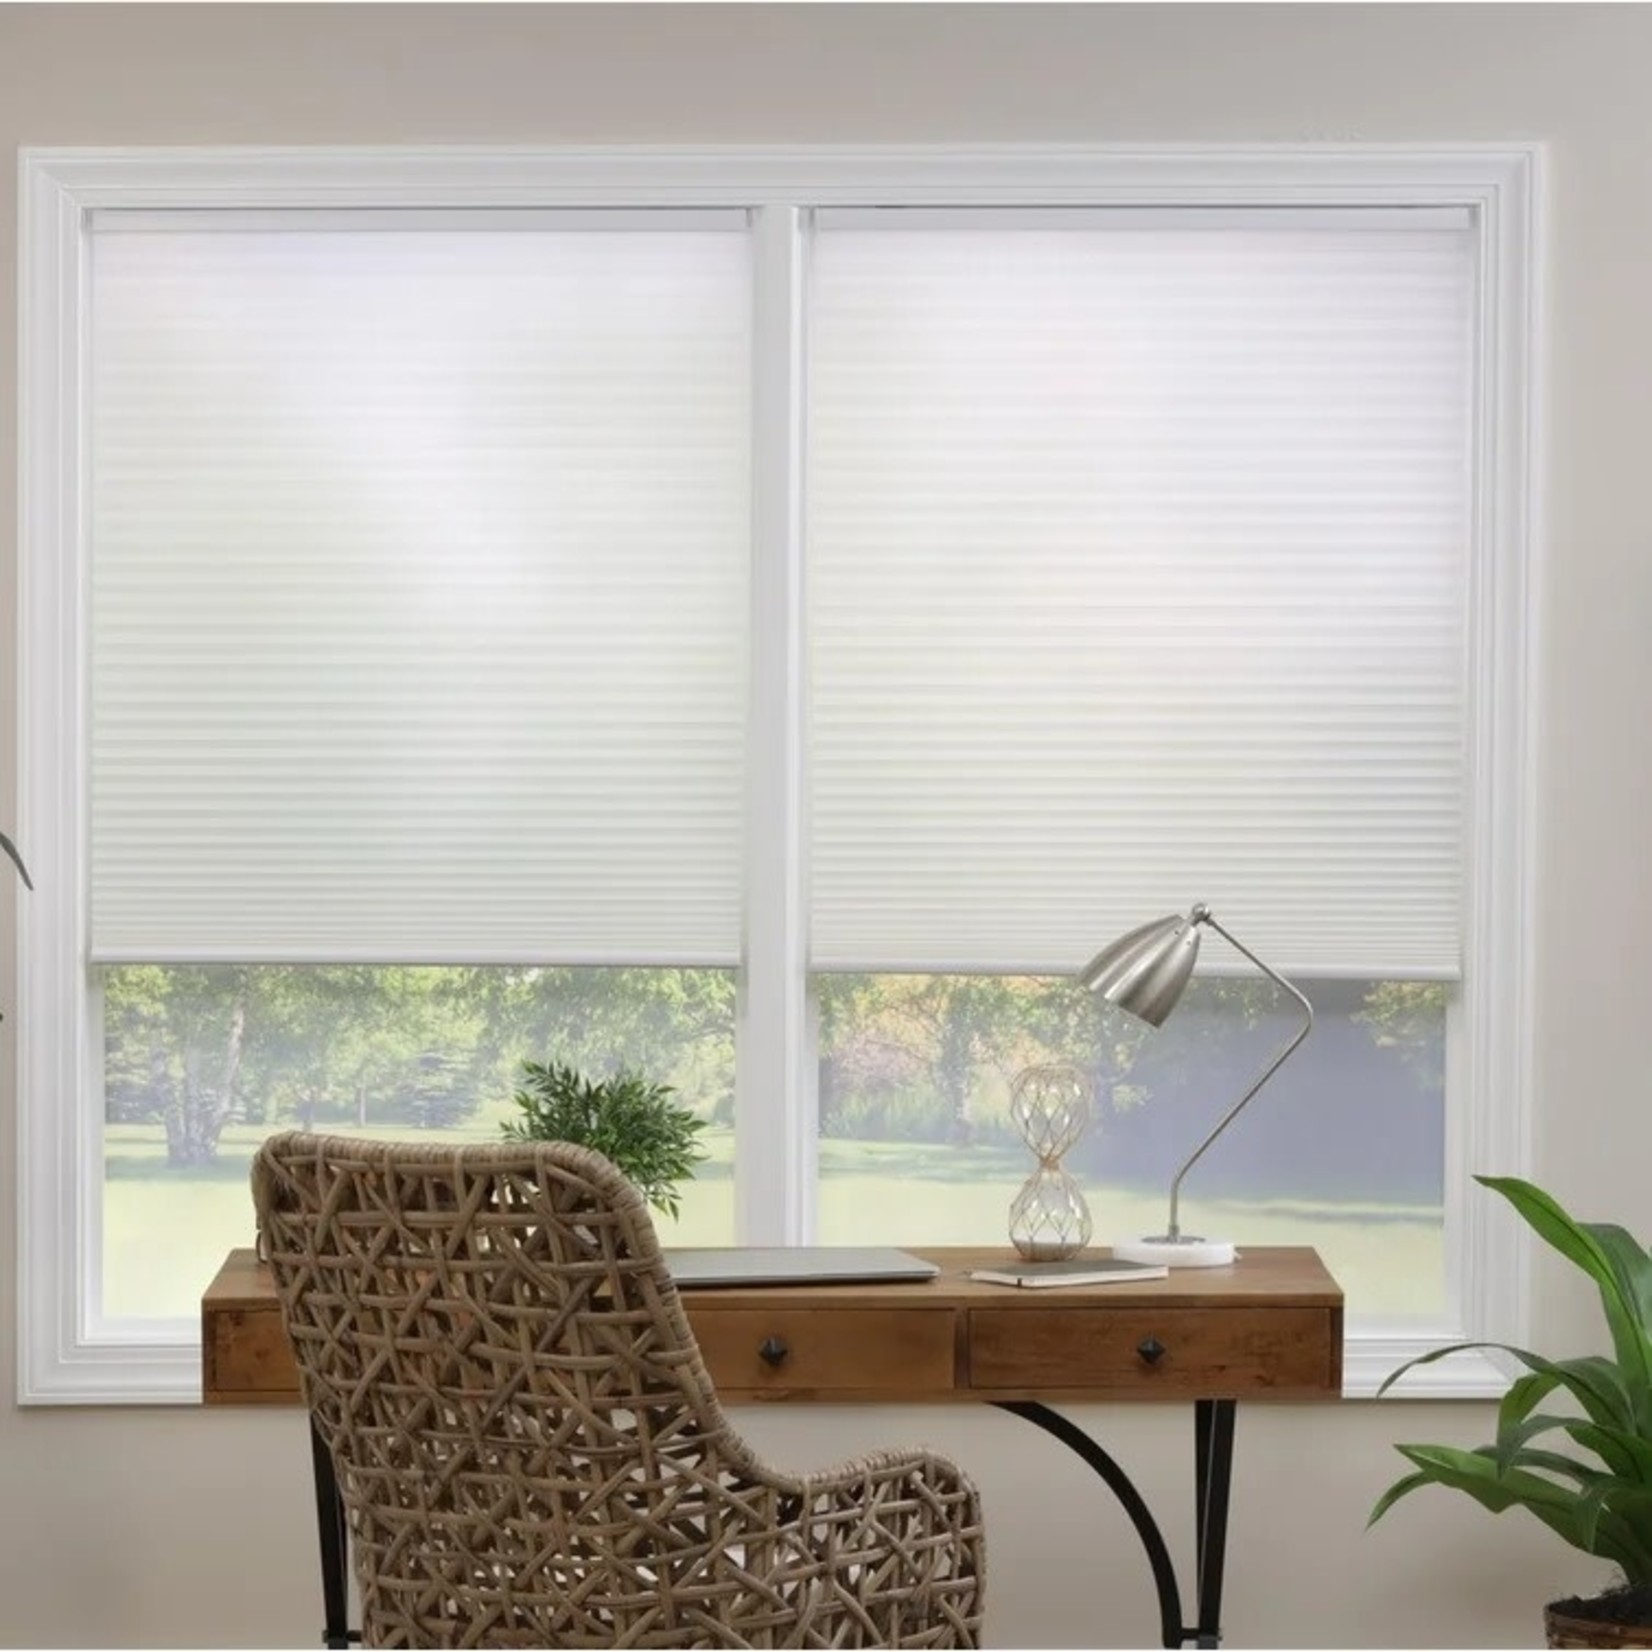 *40.5" x 72" Cordless Double Semi-Sheer Cellular - White Shade - Final Sale